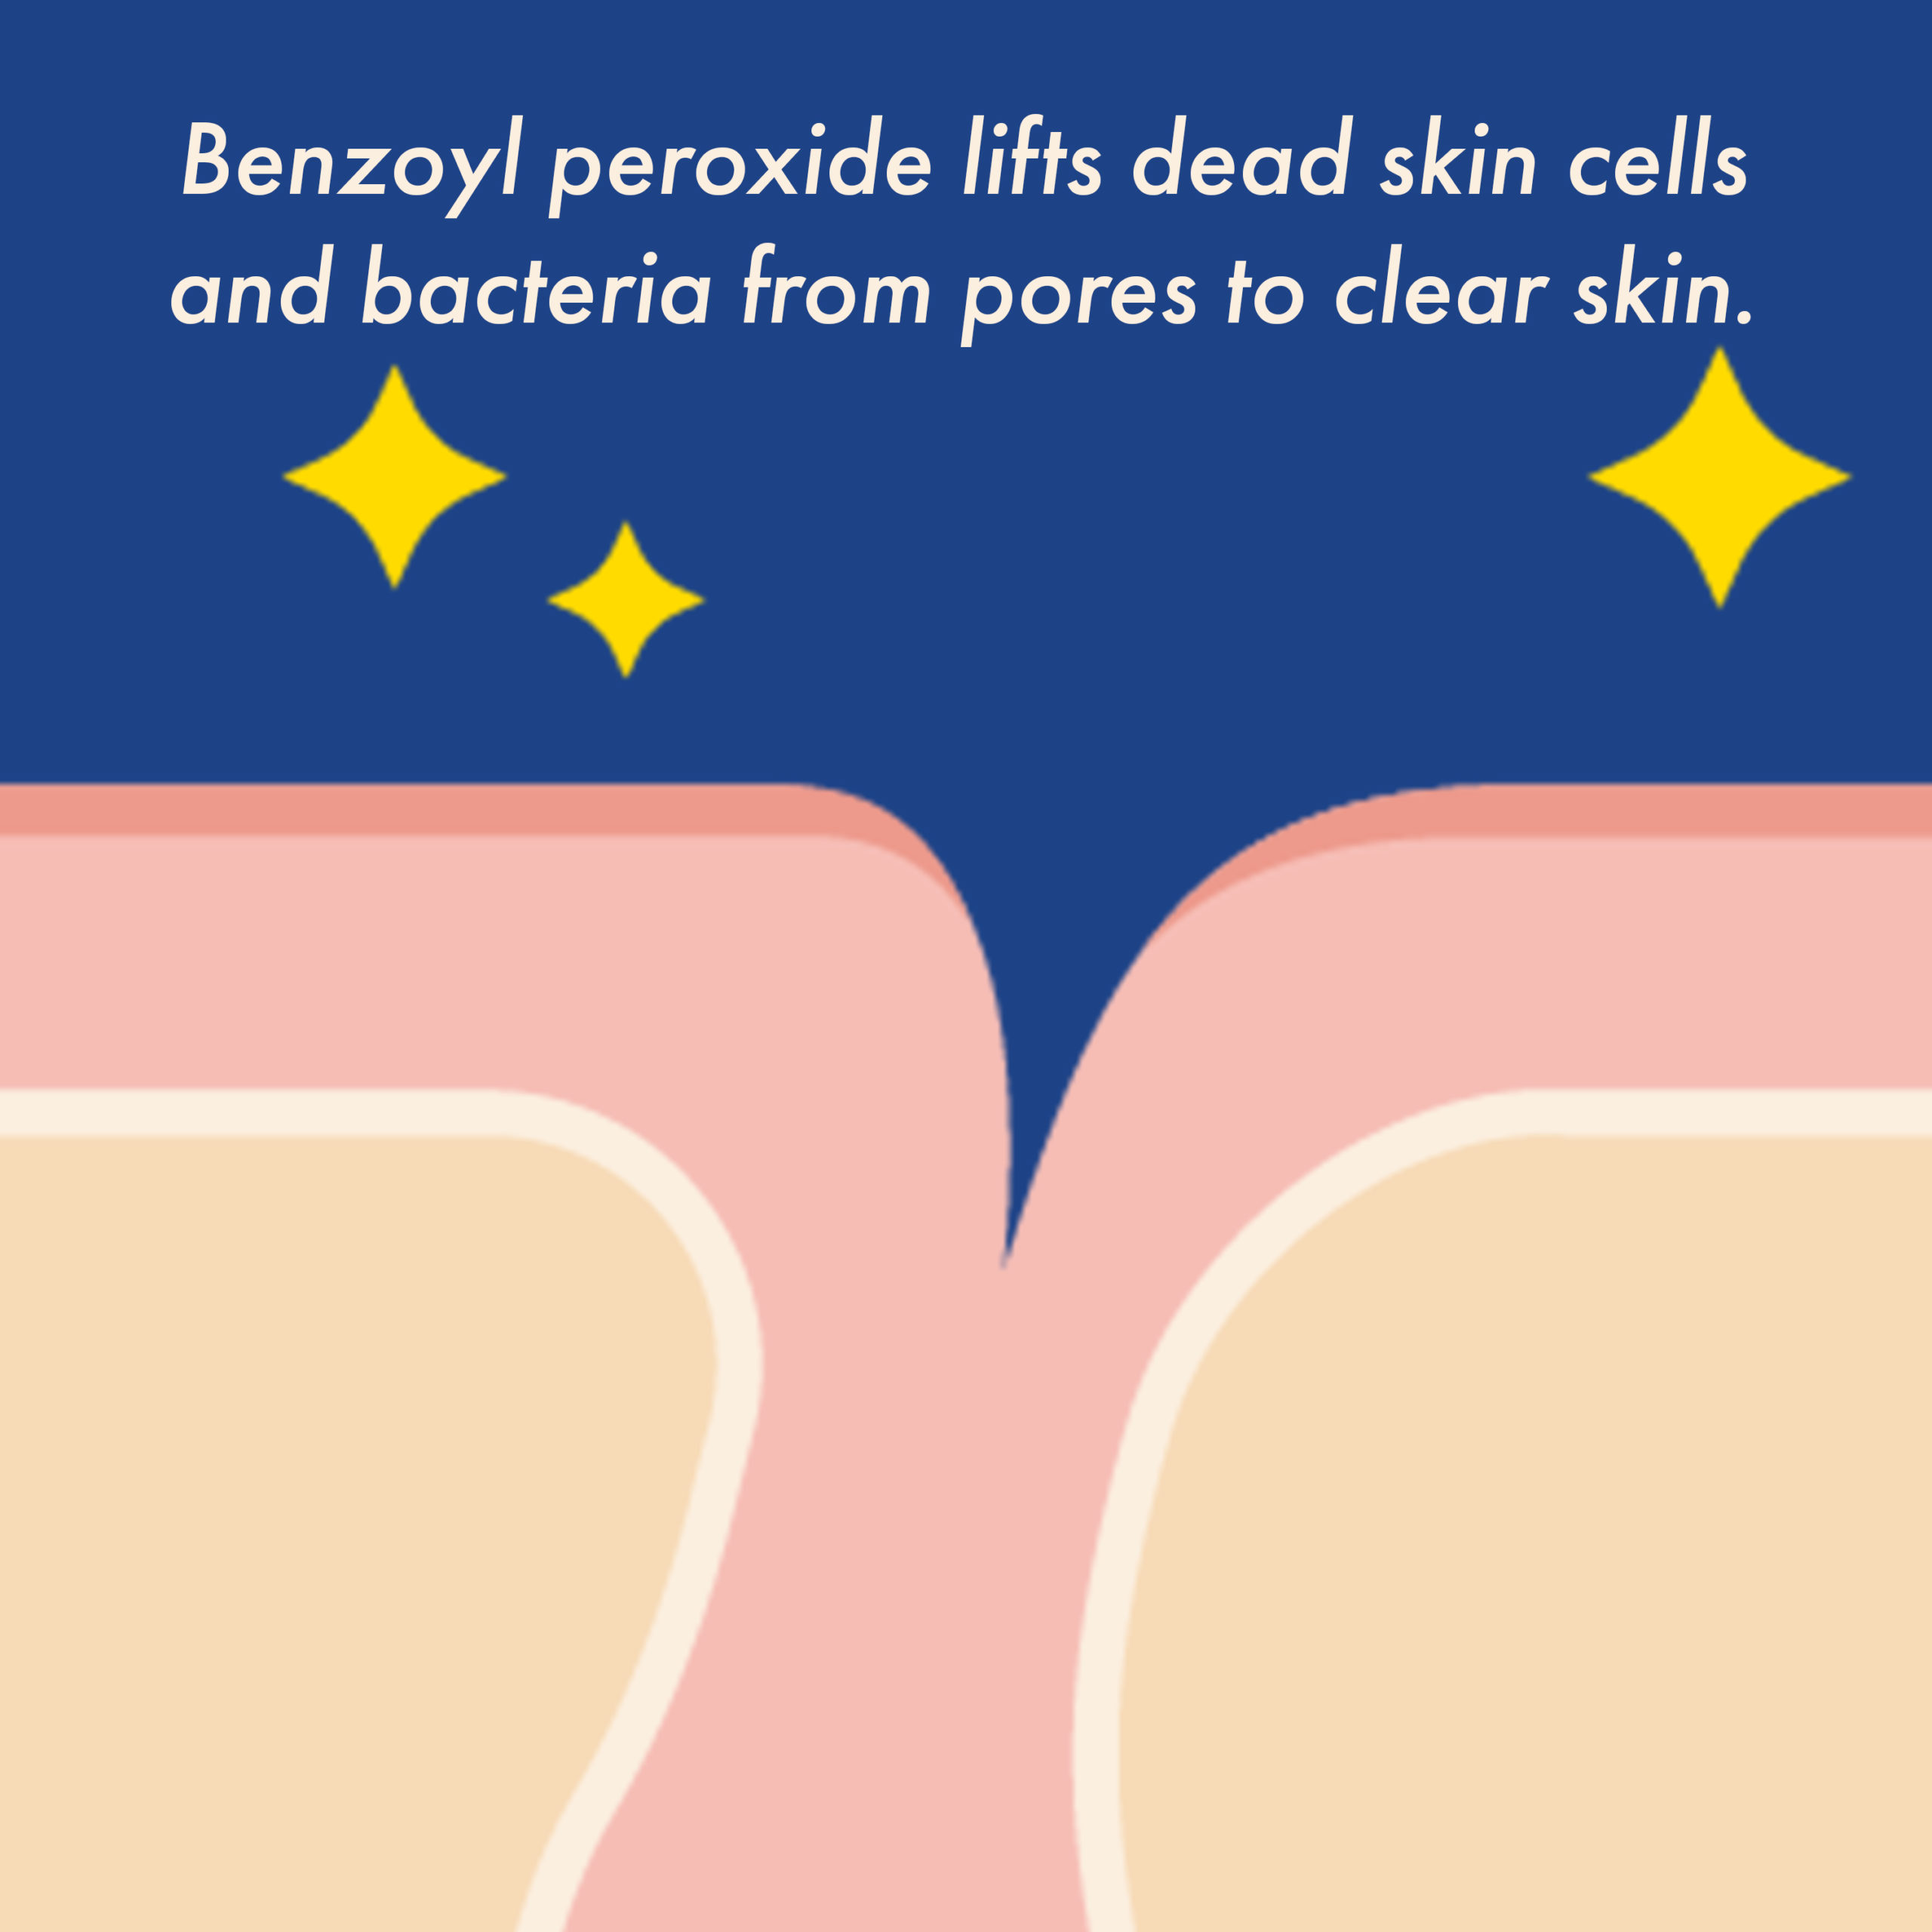 Benzoyl peroxide lifts dead skin cells and bacteria from pores to clear skin.